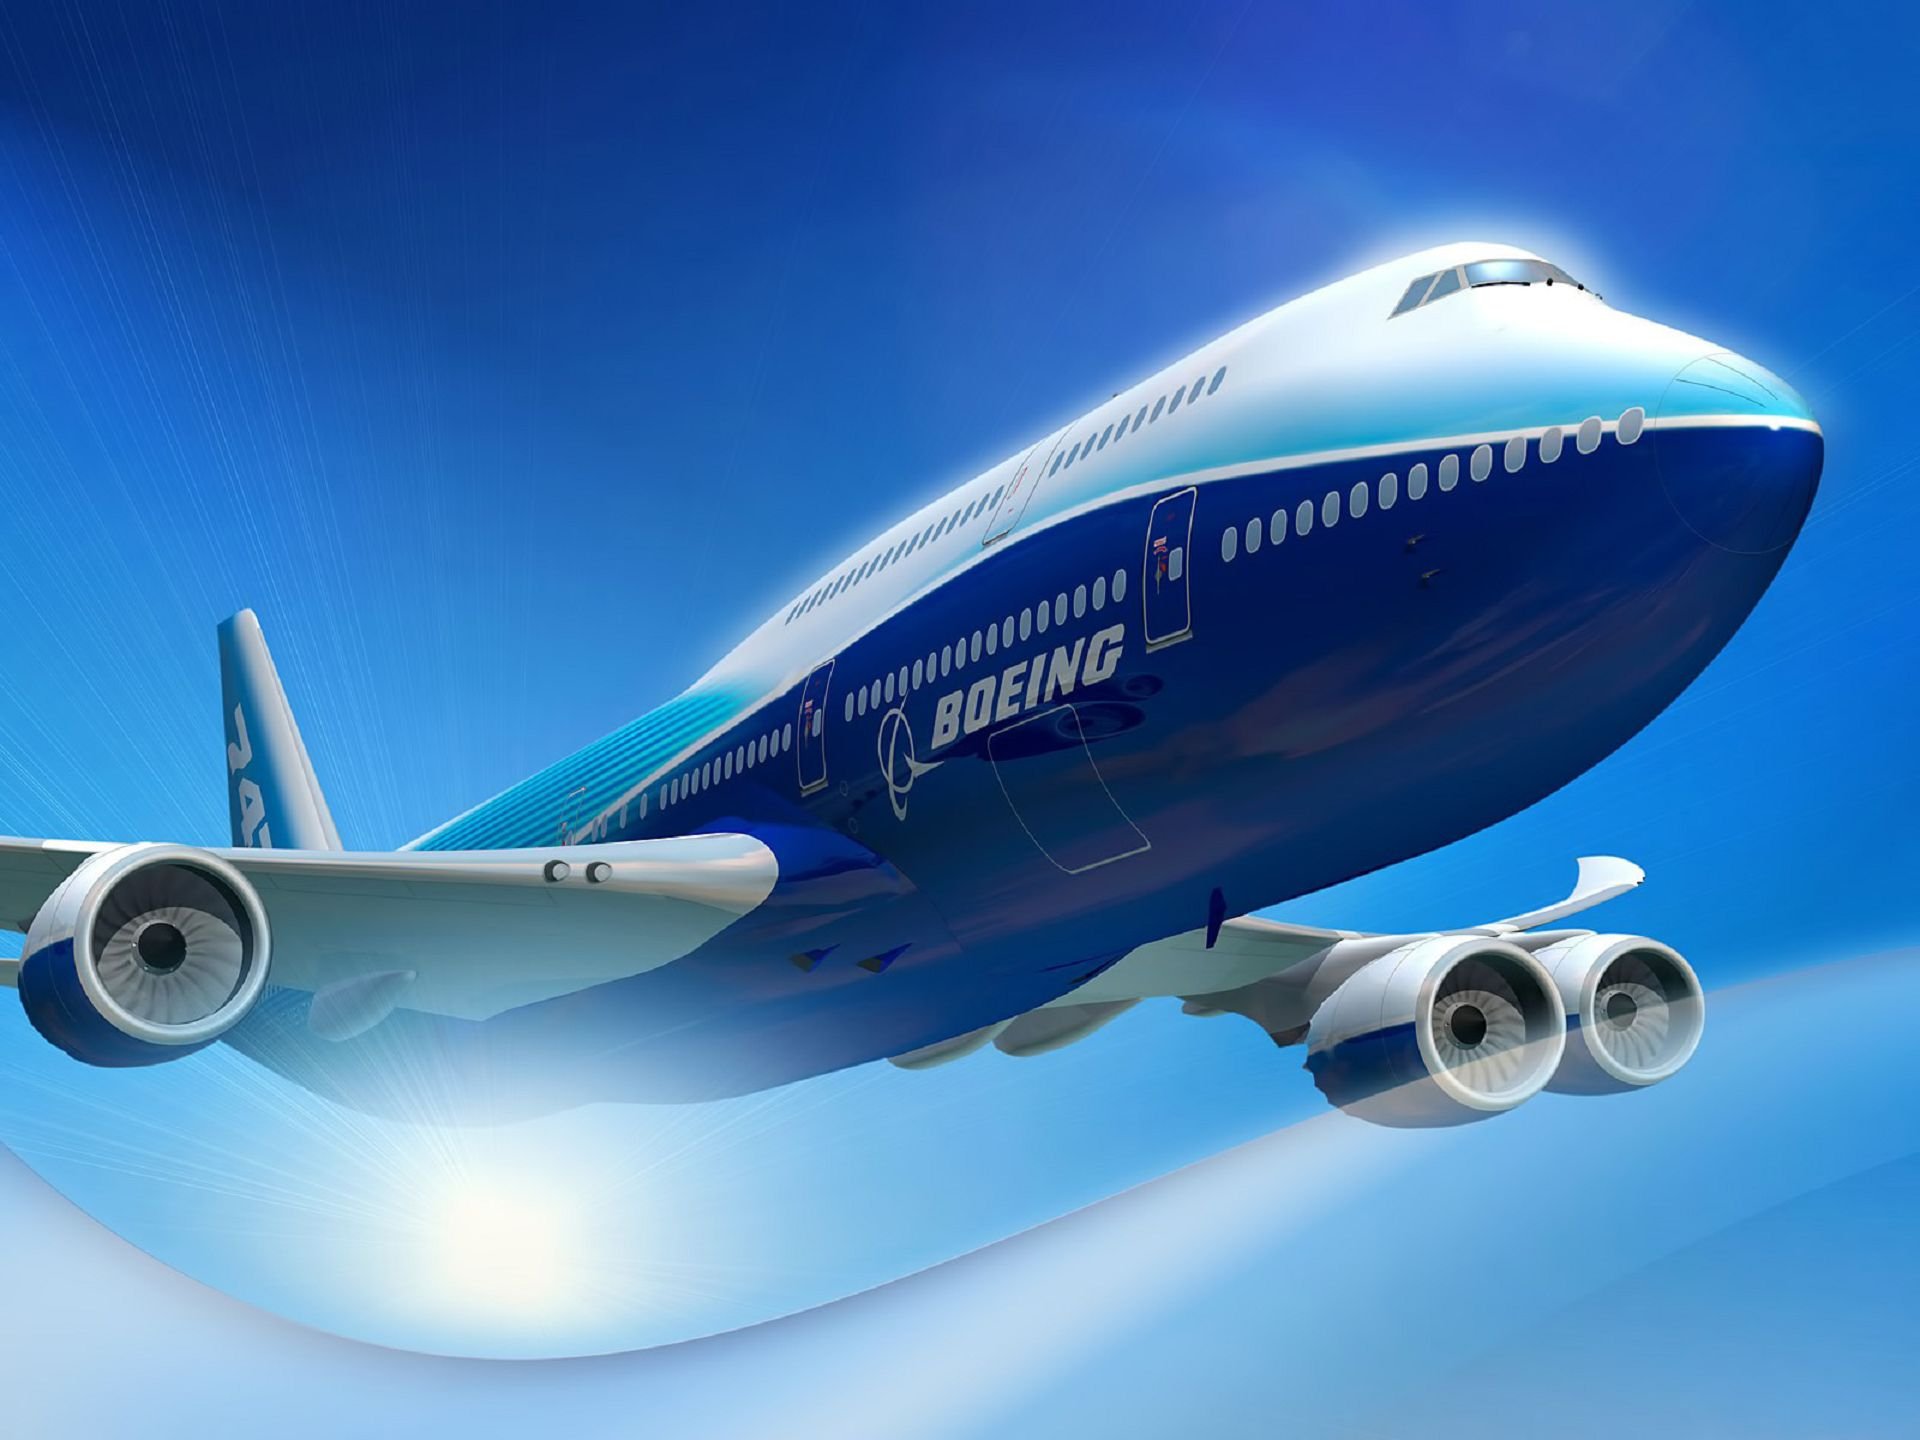 344742-boeing-747-airliner-aircraft-plane-airplane-boeing-747-transport-28